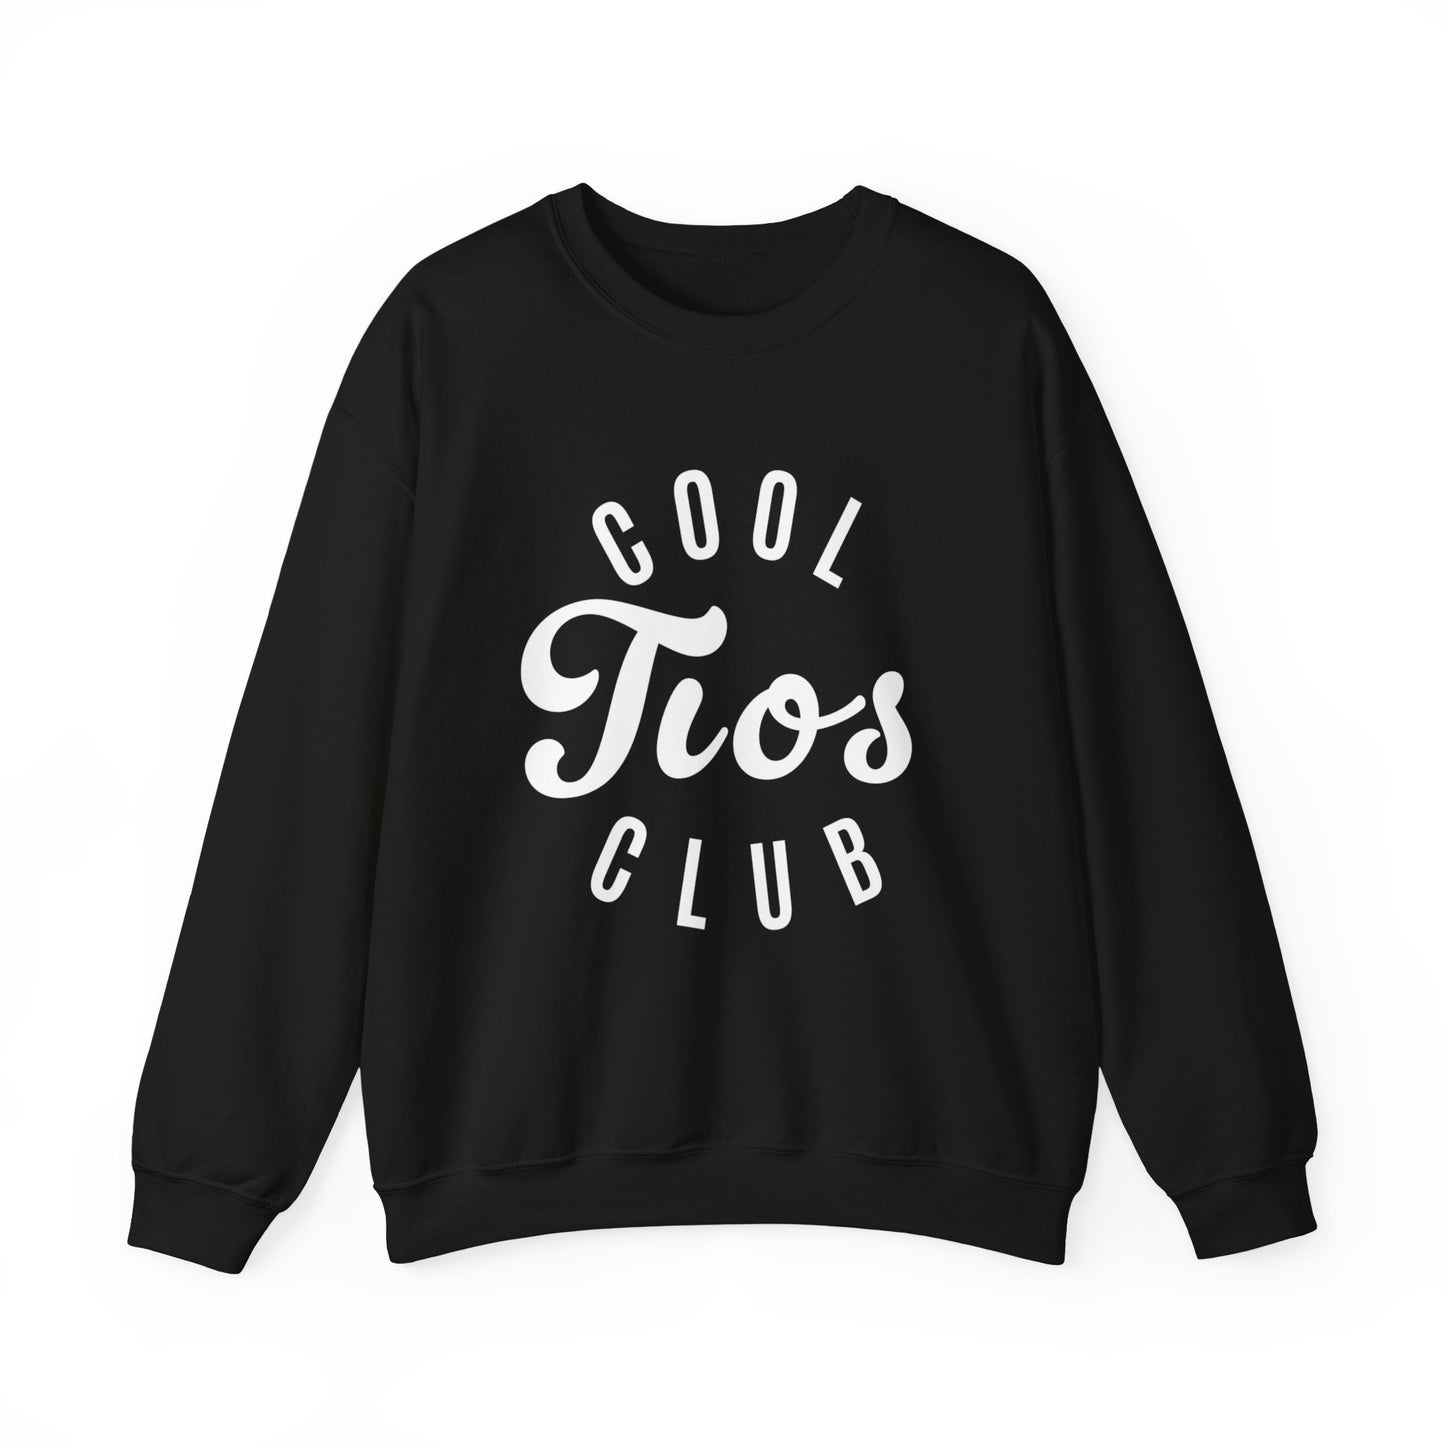 Cool Tios Club Sweatshirt for Men, Pregnancy Announcement Sweatshirt for Tios, Cool Tios Sweatshirt, Funny Gift for Tios to Be, S1095